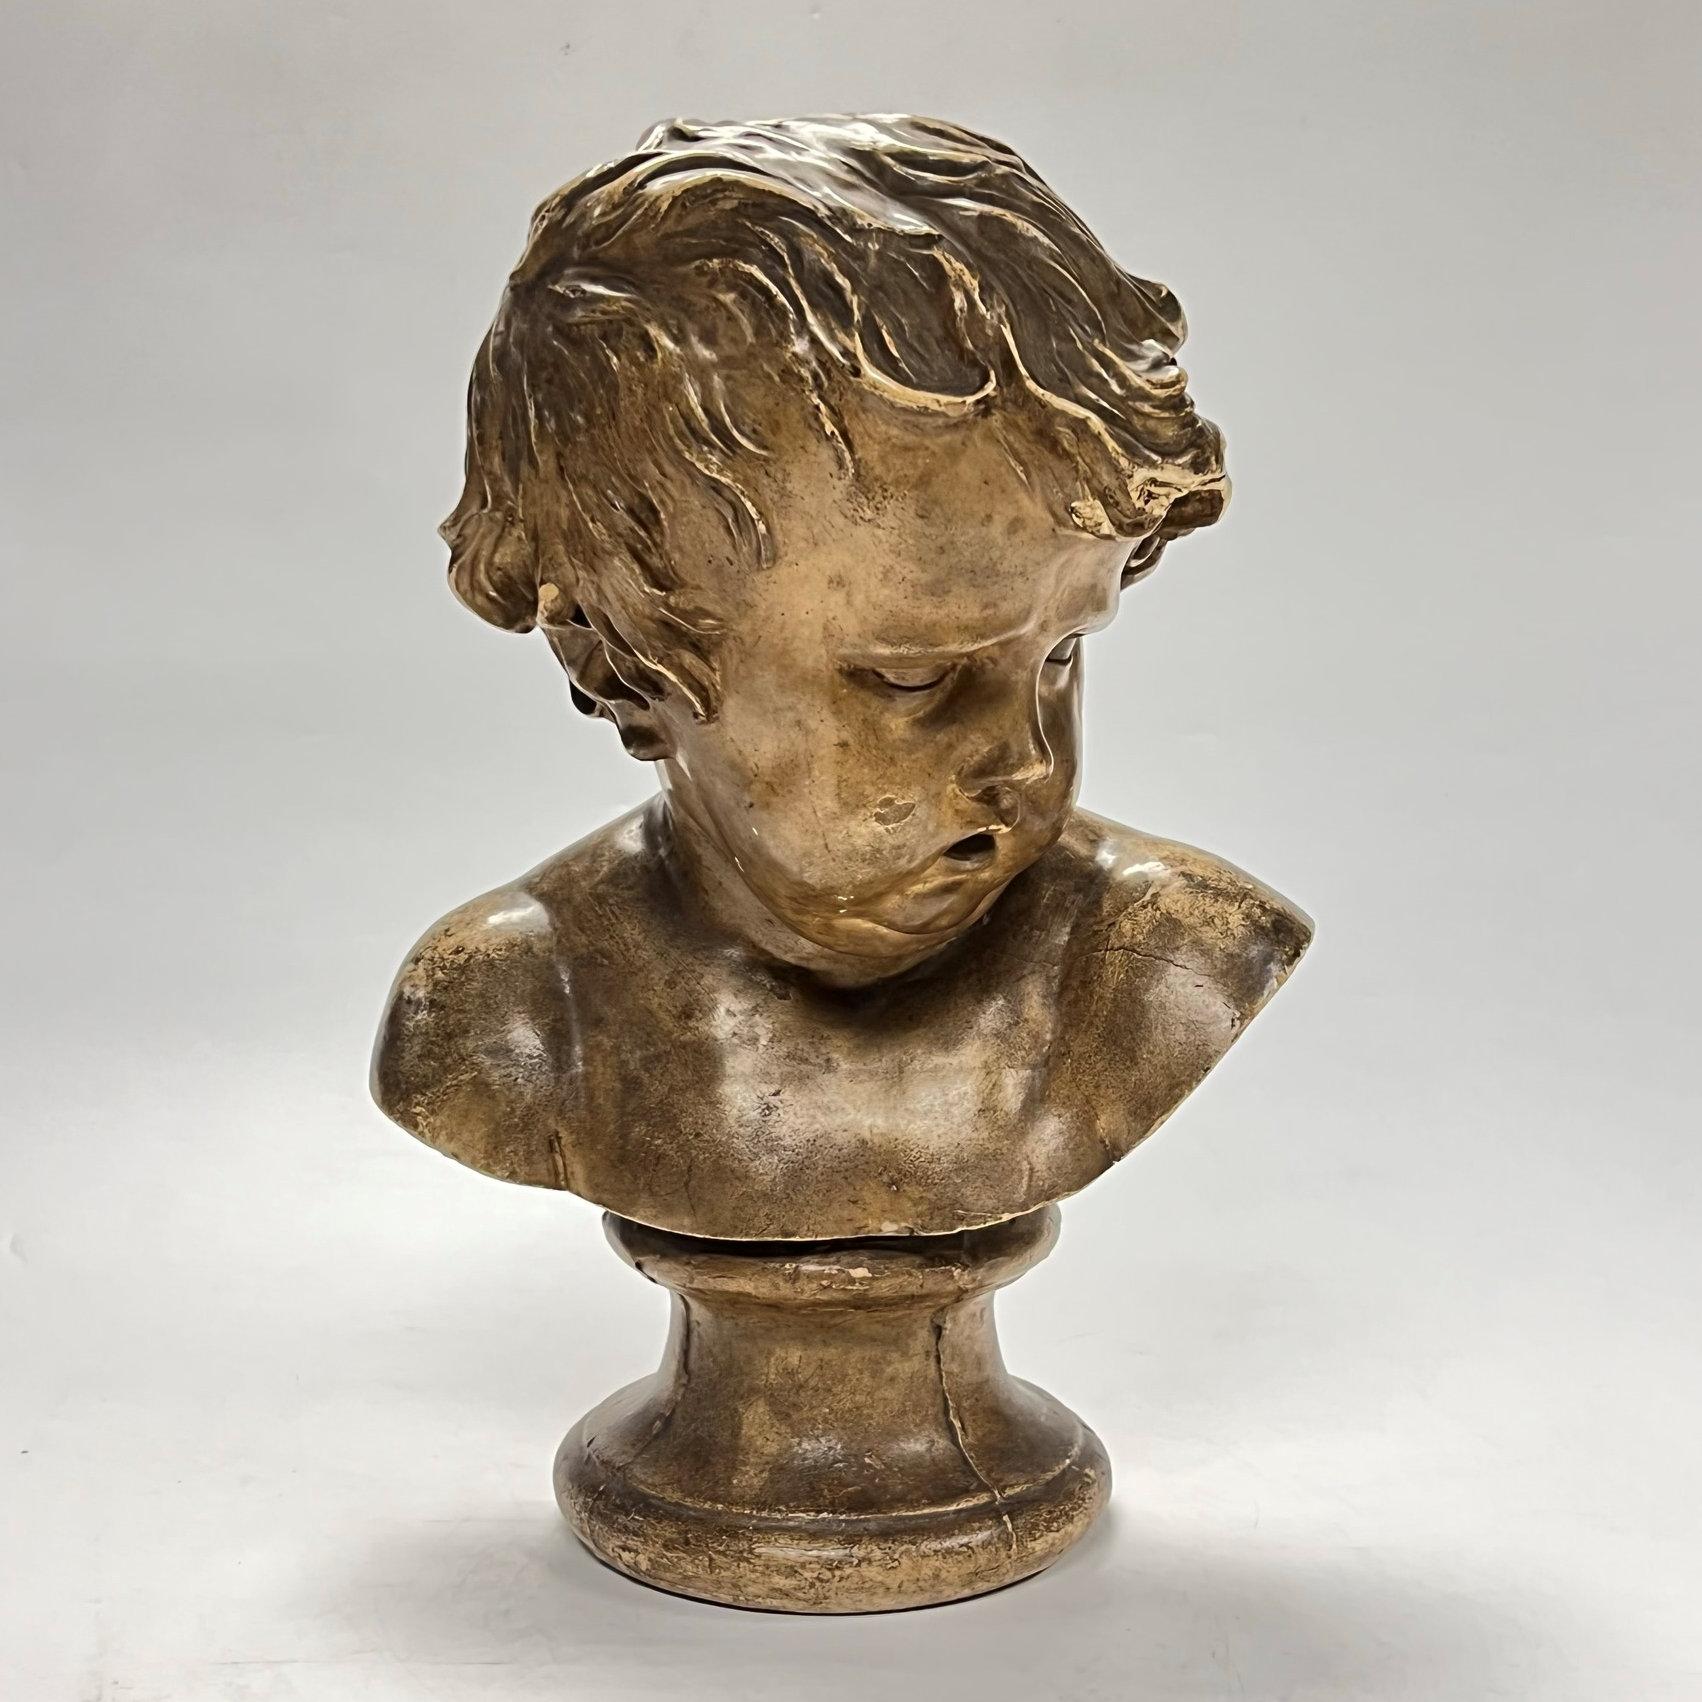 Antique Grand Tour plaster bust of a cherub after the original model by Francois Duquesnoy (1597-1643) dating from the early 20th century.  Likely of Italian or French origin.
